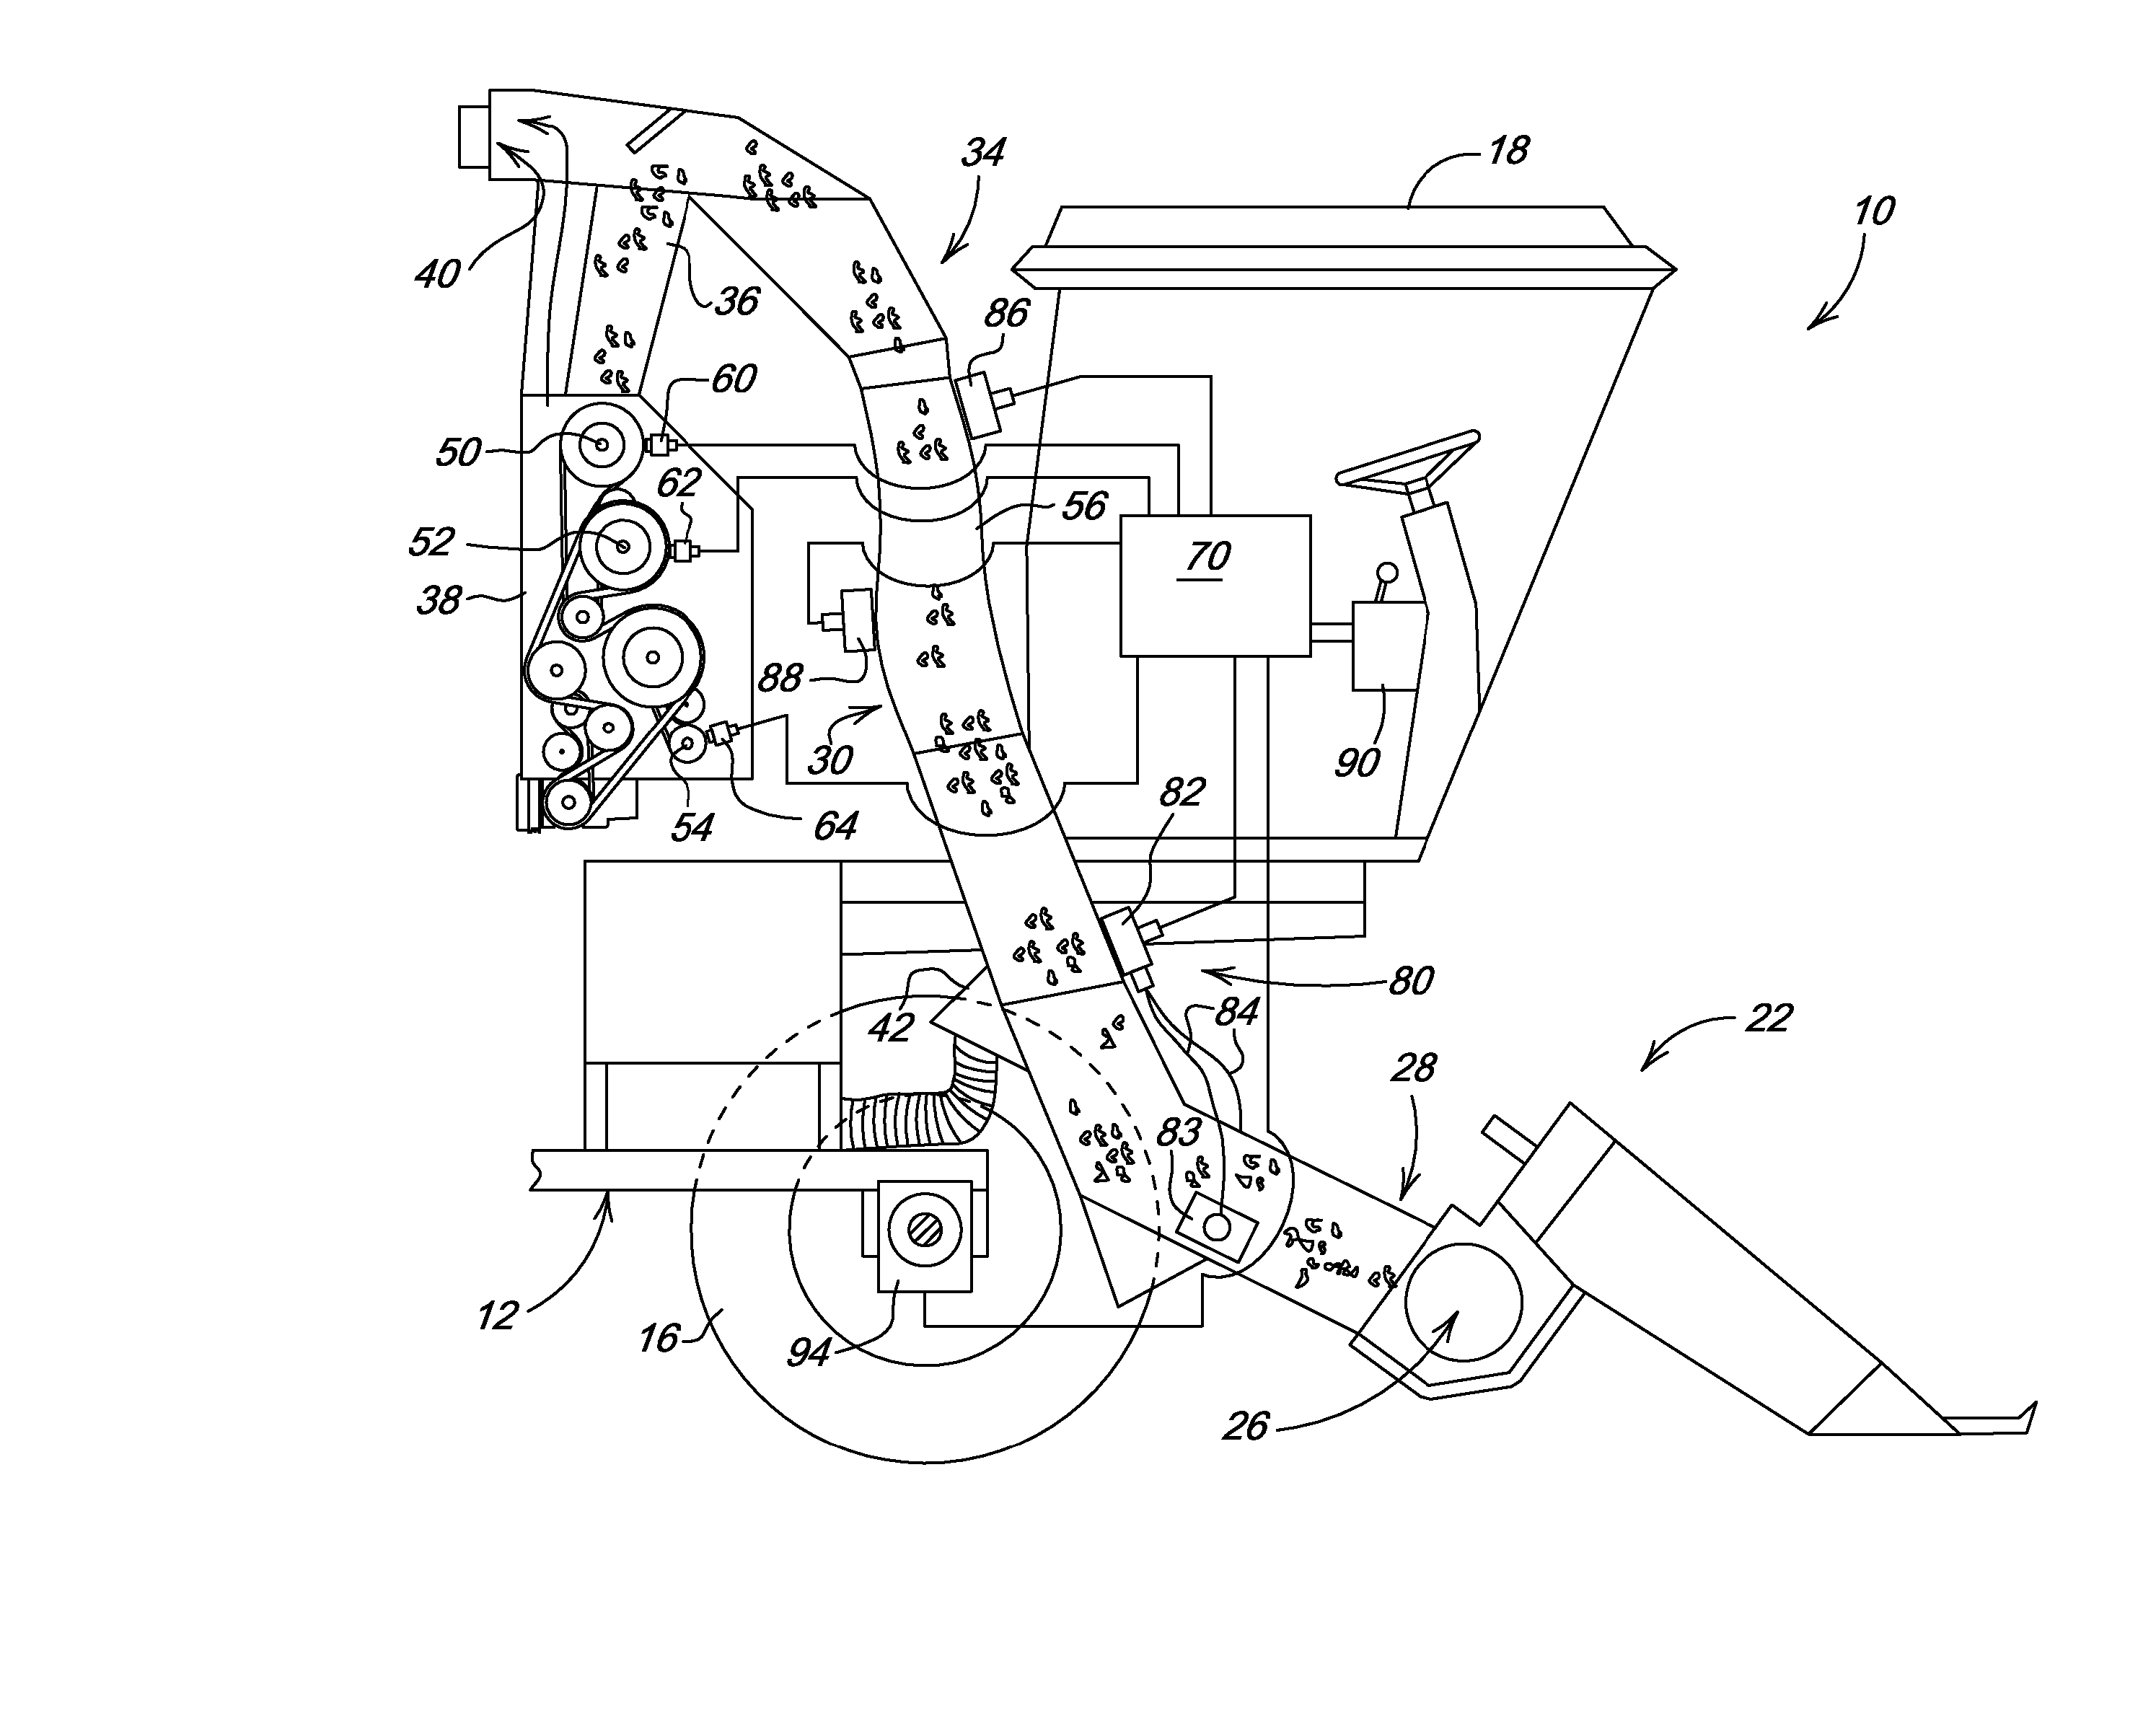 Conveying Duct Monitor System for Controlling Harvester Speed